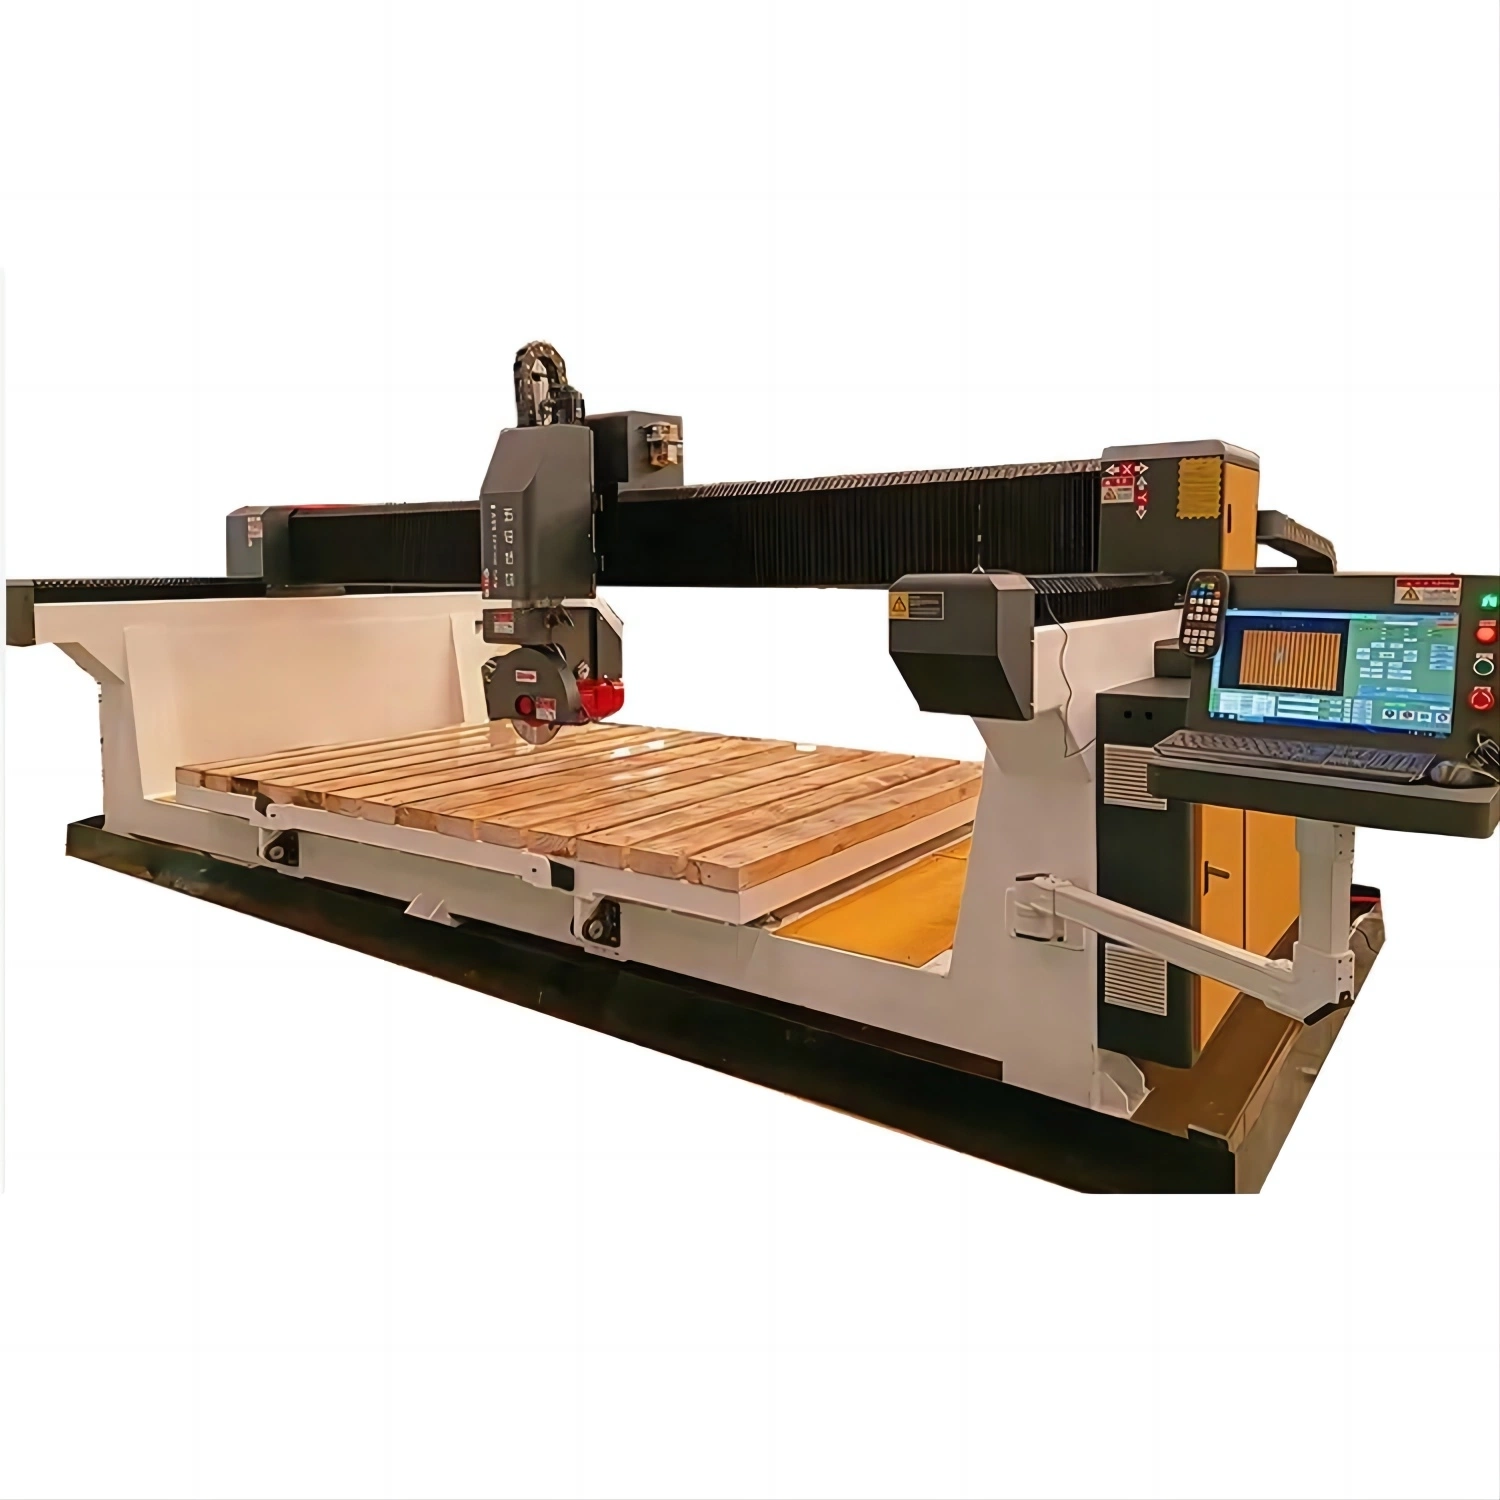 Multifunction 5 Axis Automatic CNC Granite Marble Bridge Saw Cutting Machine for Stone Granite Marble